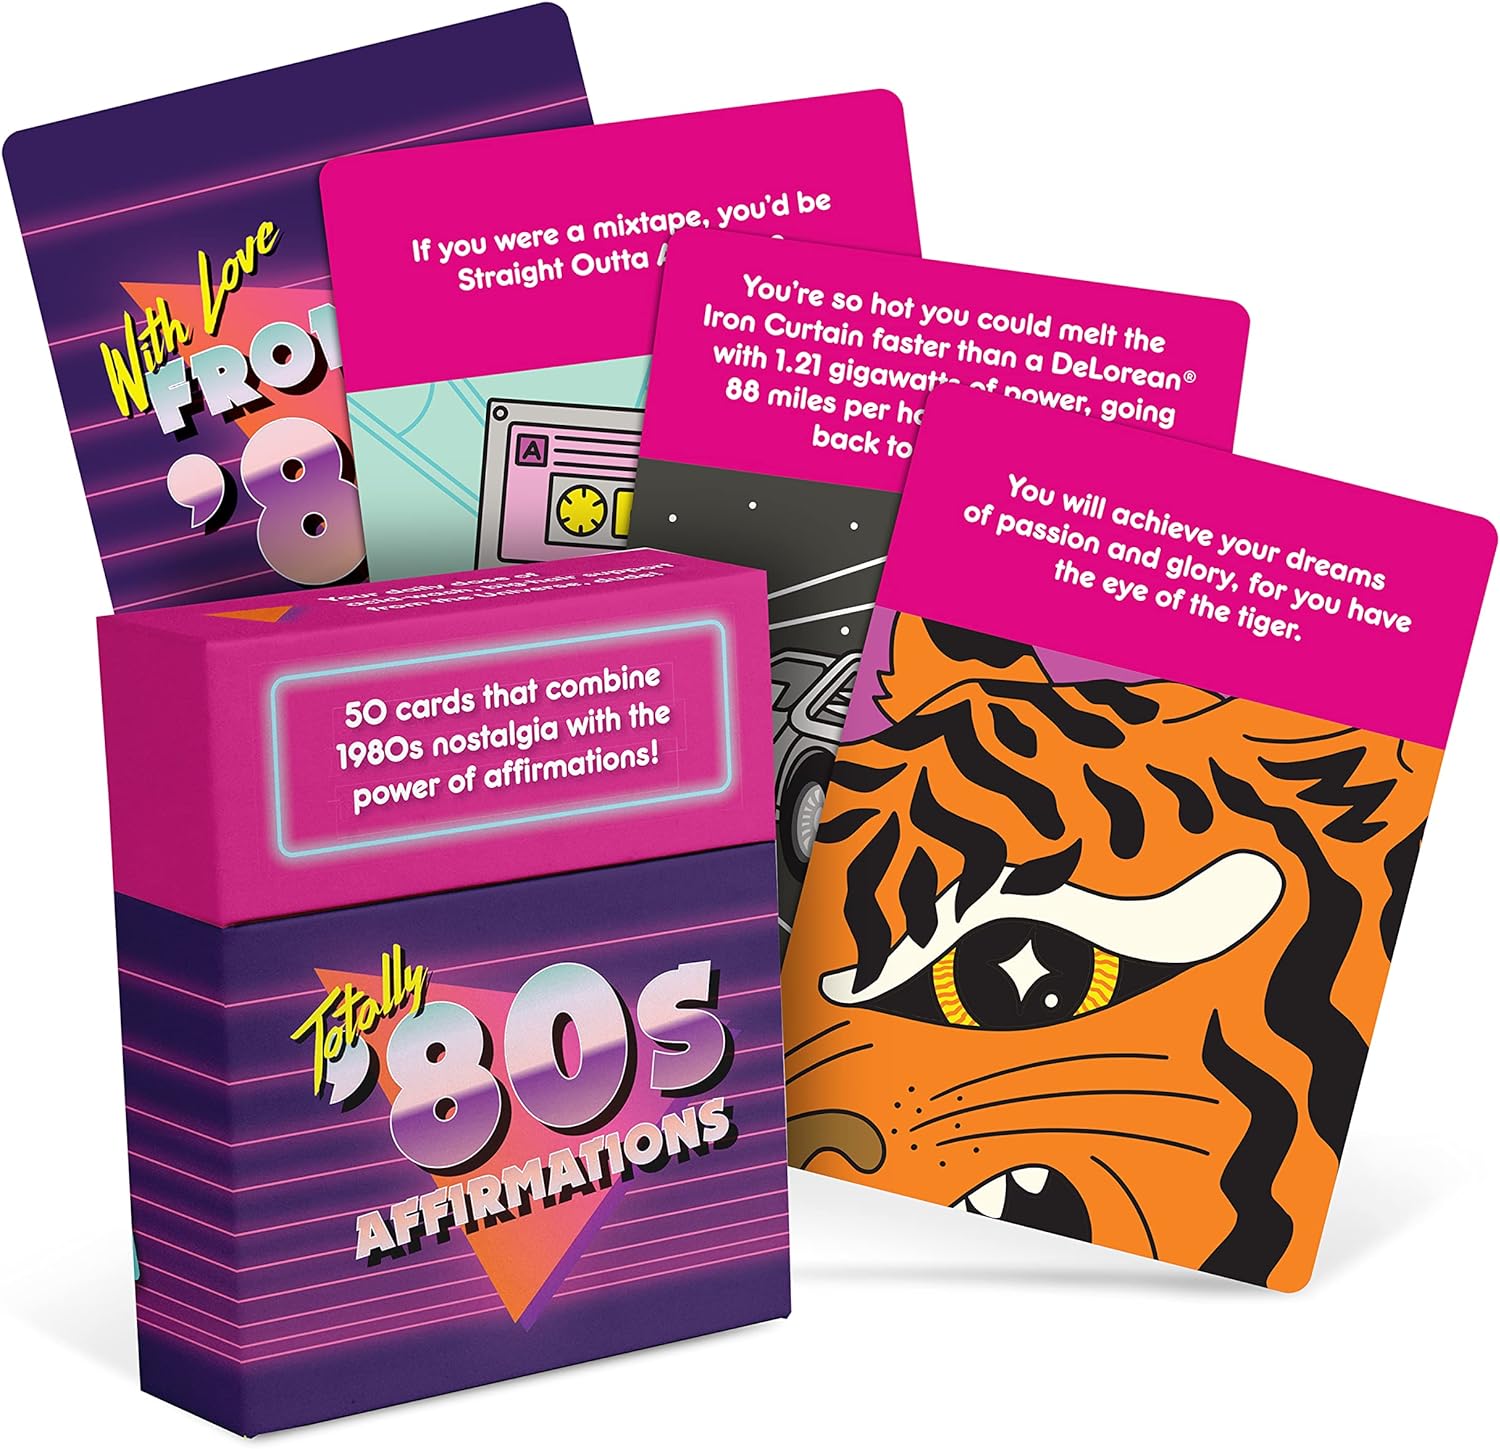 Knock Knock Totally 80s Affirmations Deck: 50 Cards That Combine 1980s Nostalgia With The Power of Affirmations! (Affirmations from the Decades)